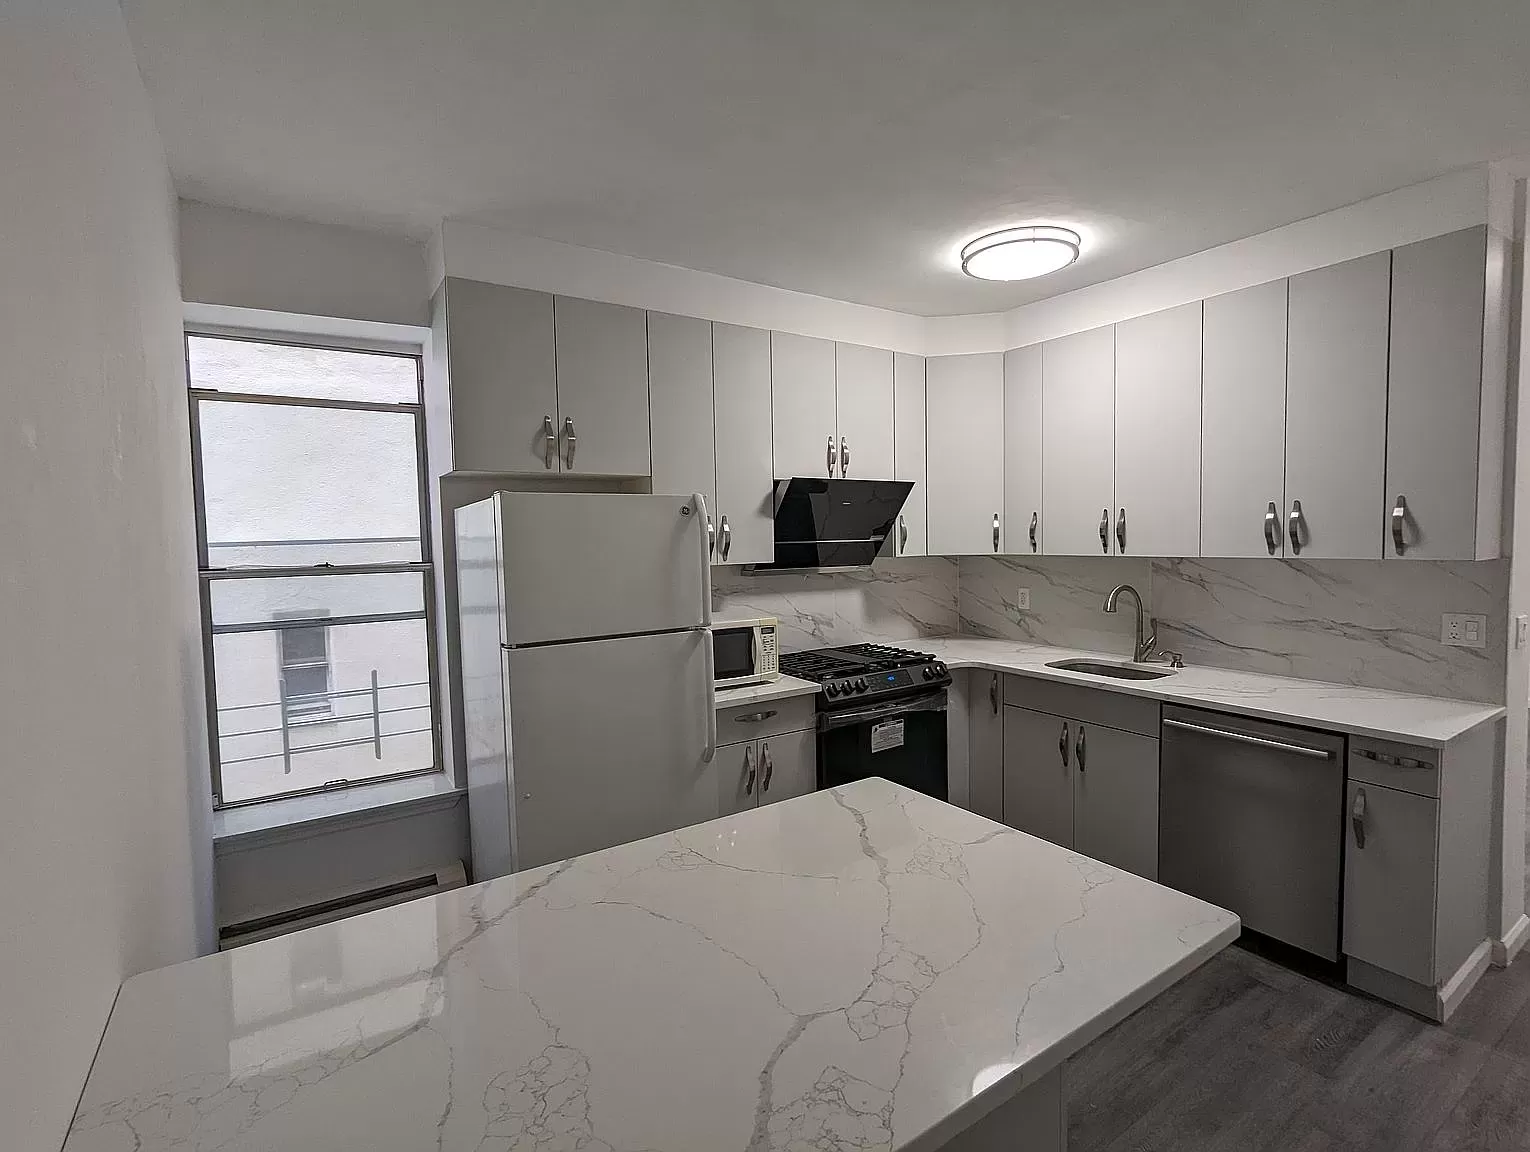 Apartment for Rent in Union St, APT 3E, Brooklyn, NY